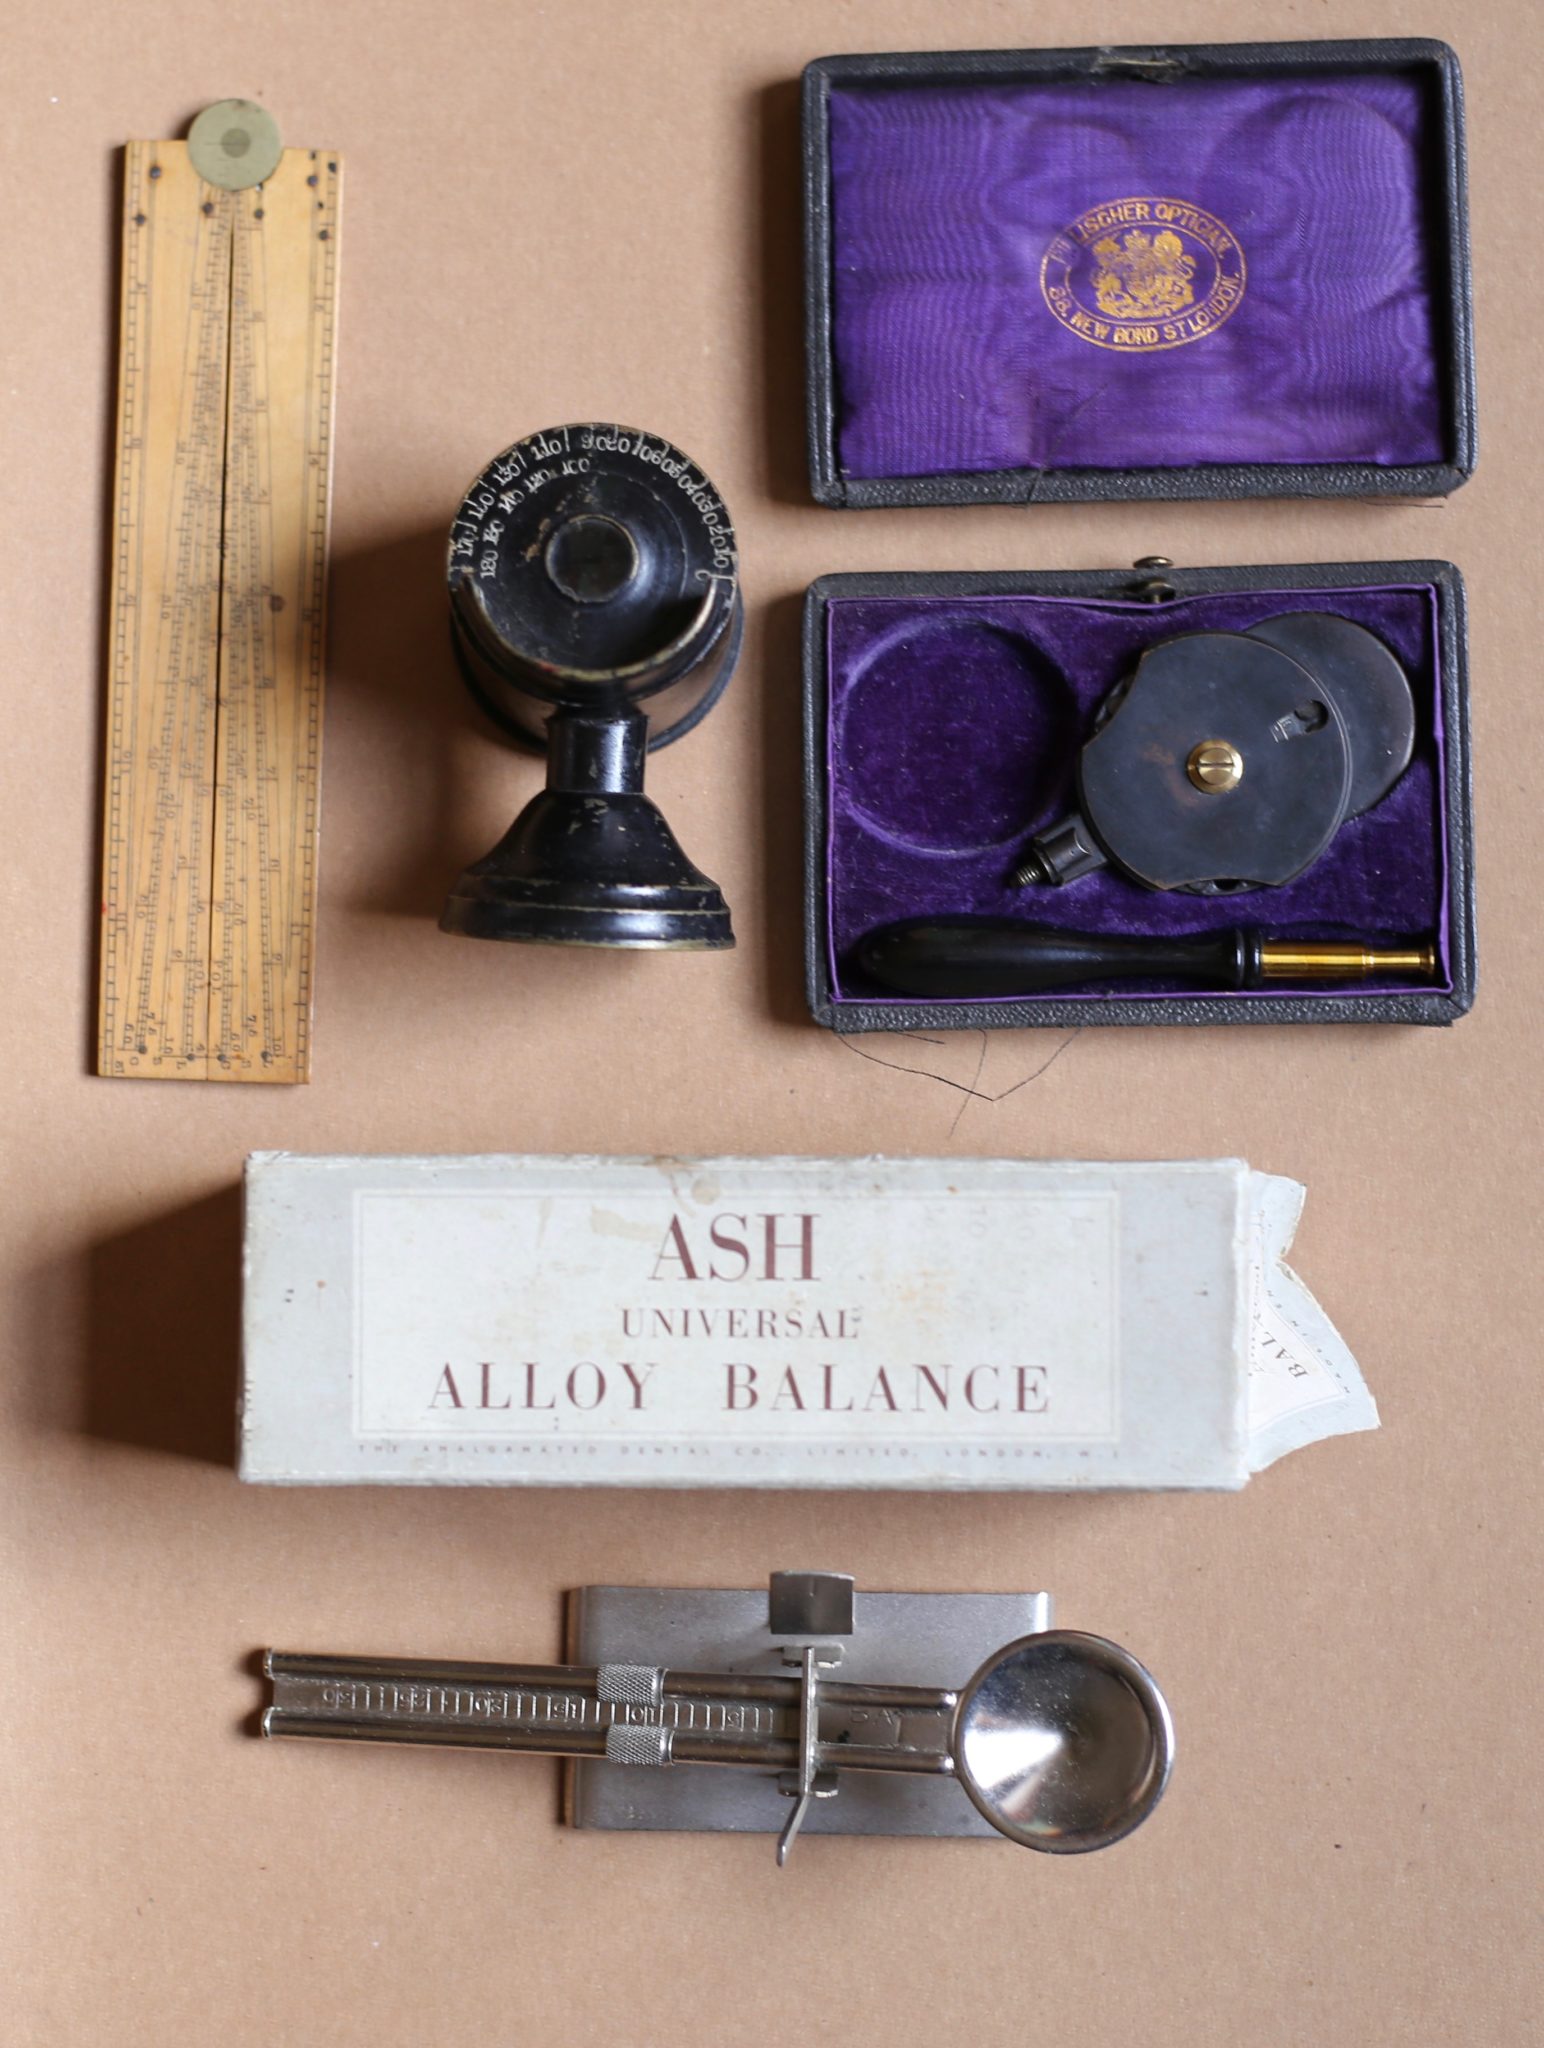 A Boxwood Sector, an Ash Universal Alloy Balance, a Model Eye and a Nettleship type Ophthalmoscope by Pillischer